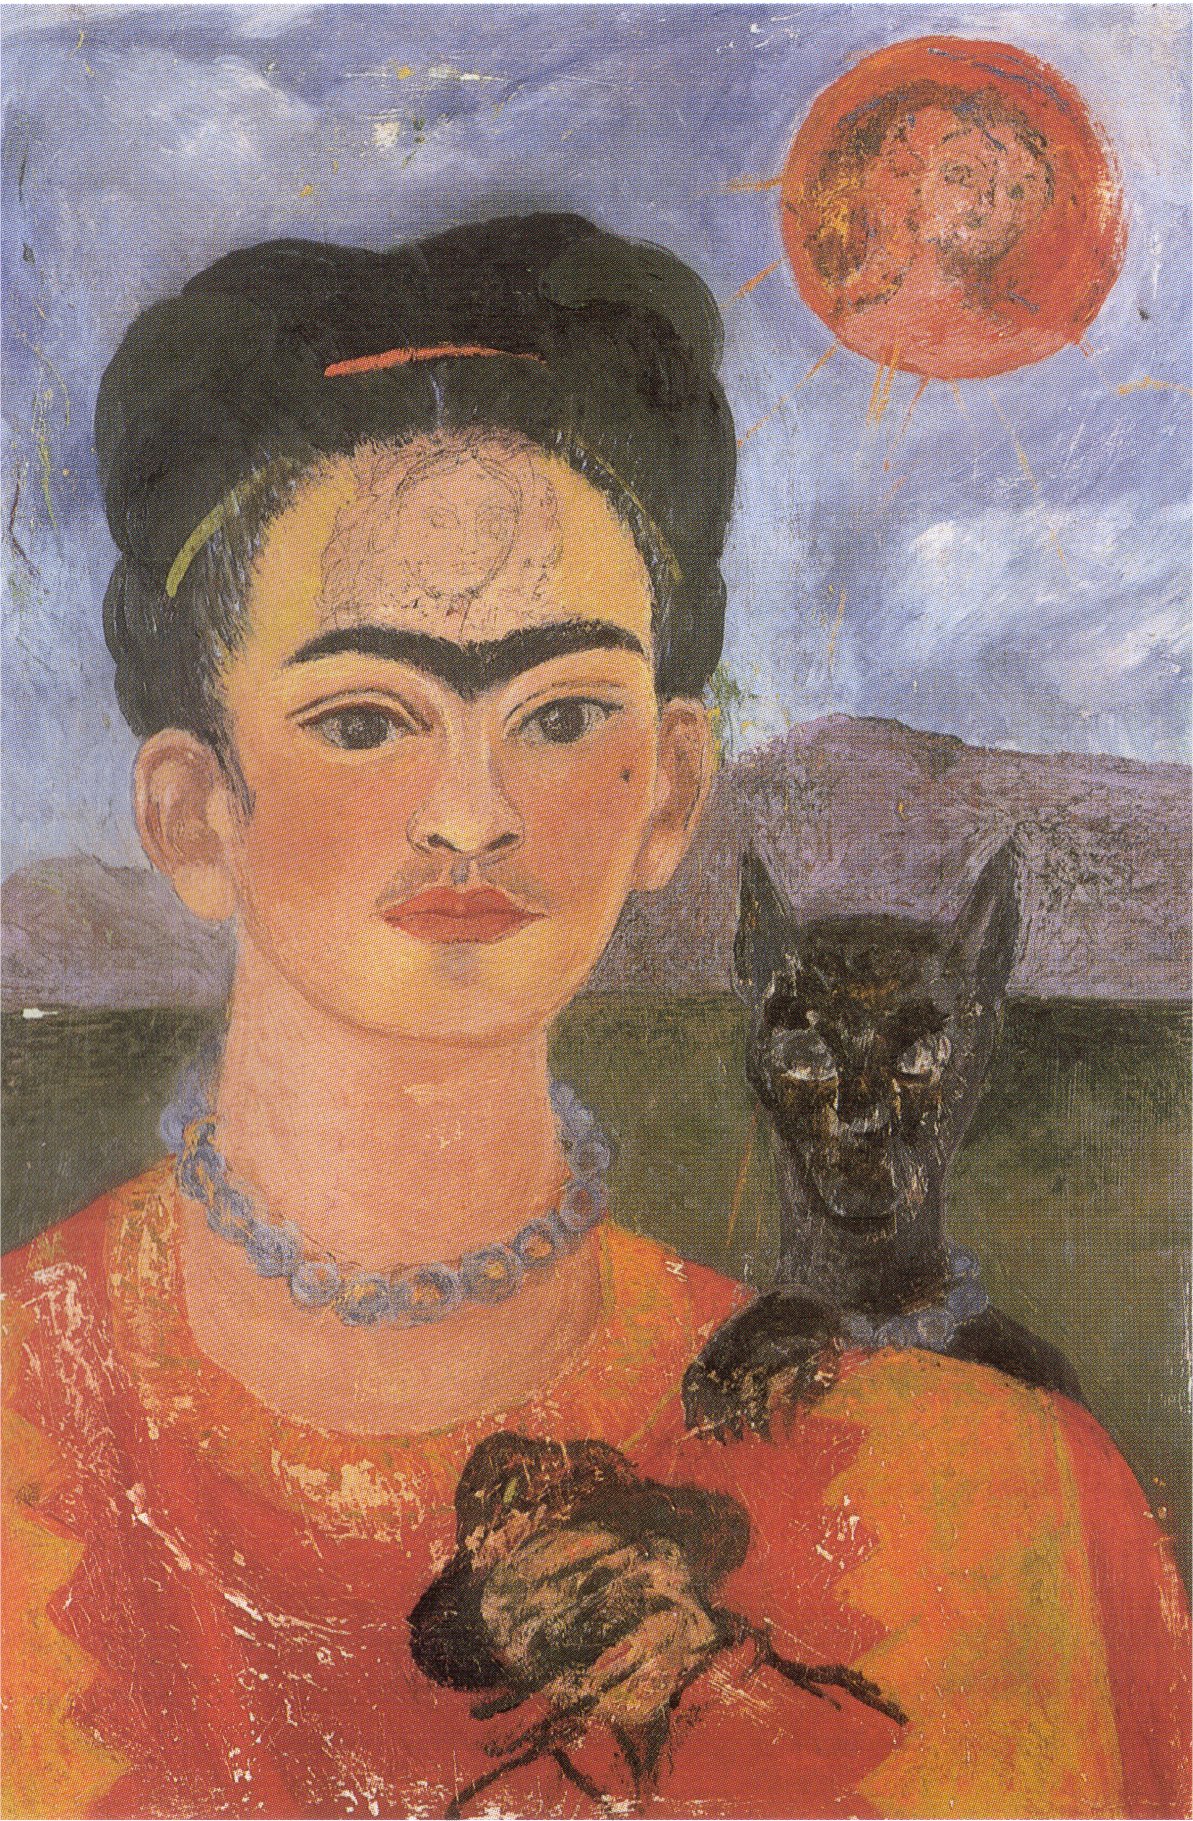 Self Portrait with a Portrait of Diego on the Breast and Maria Between the Eyebrows (1954).